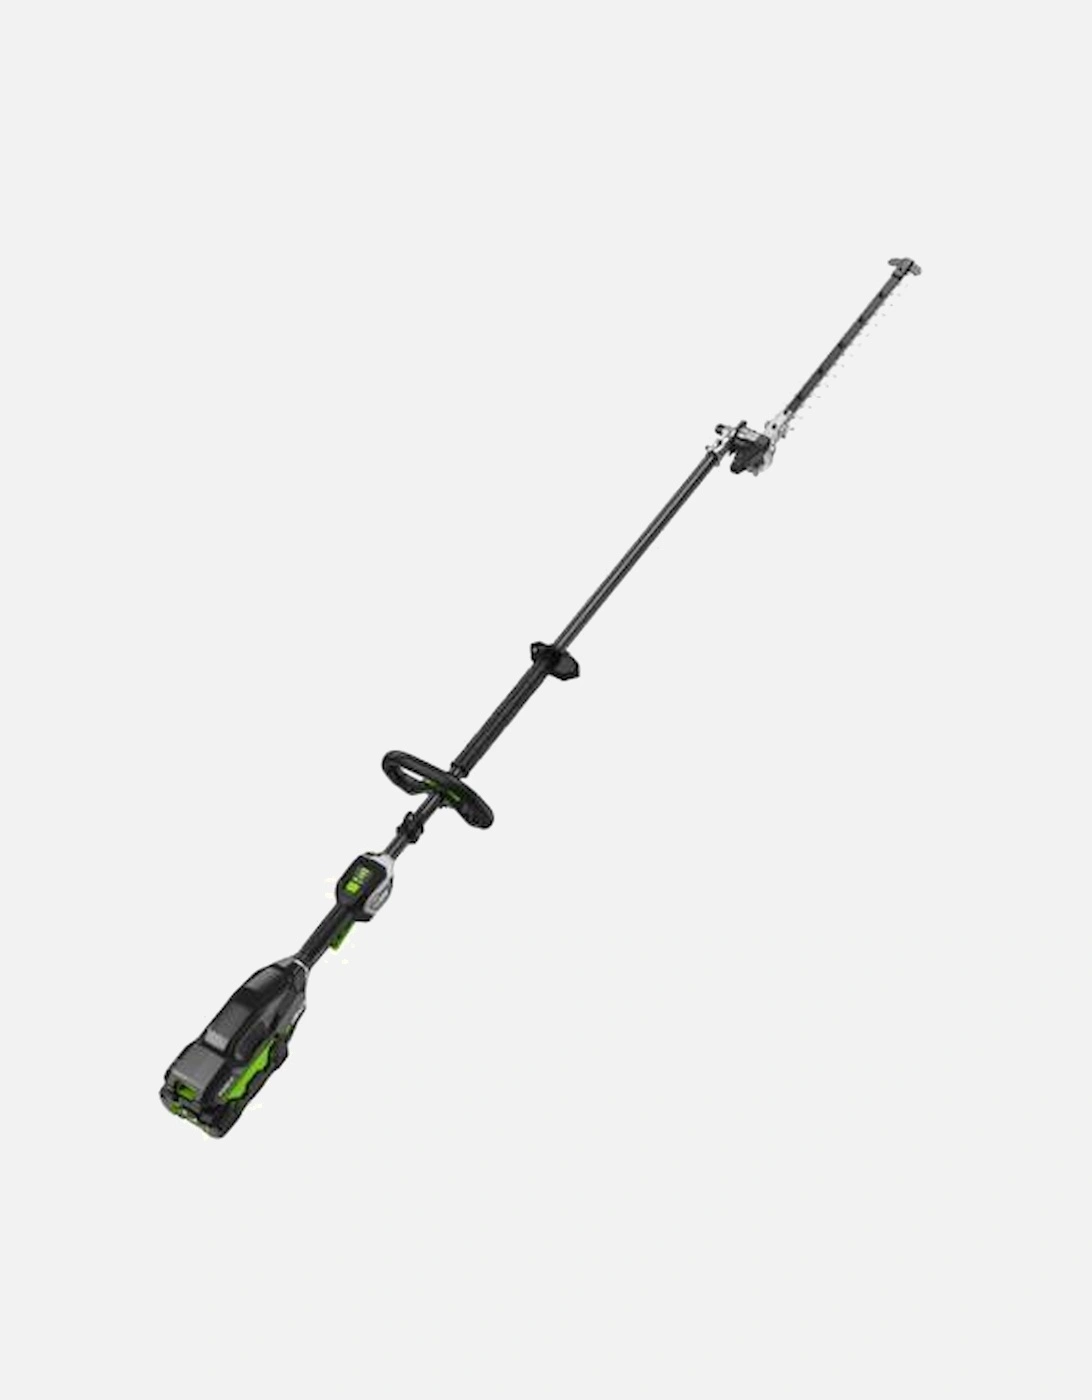 EGHTX5300-PA Hedge Trimmer